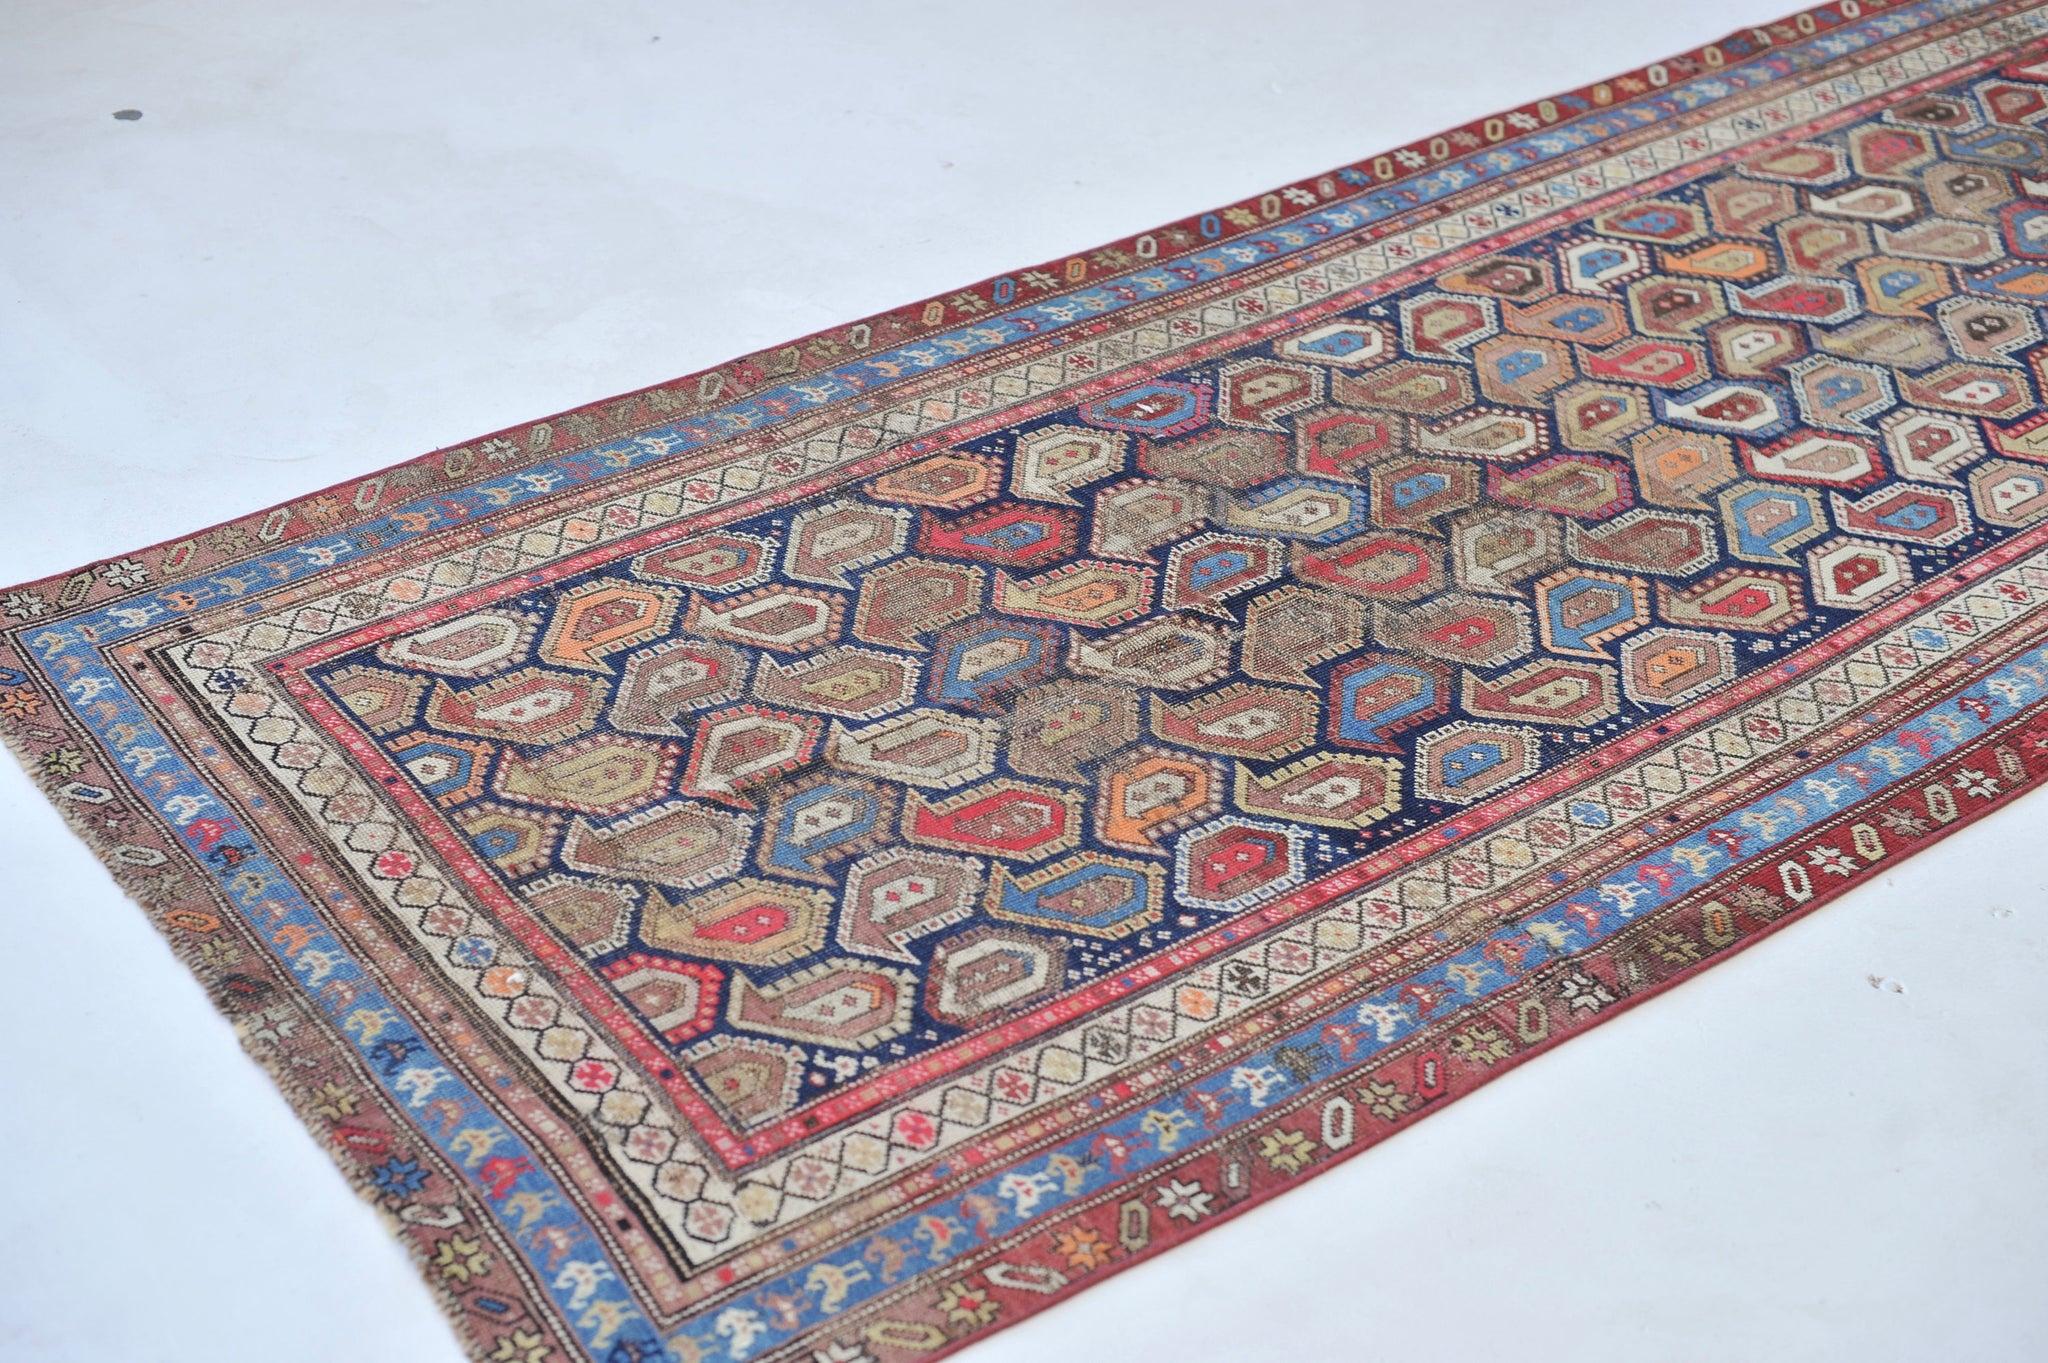 Hand-Knotted Artistic Antique Persian Runner with All-Over Interlocking-Boteh/Paisley Design  For Sale